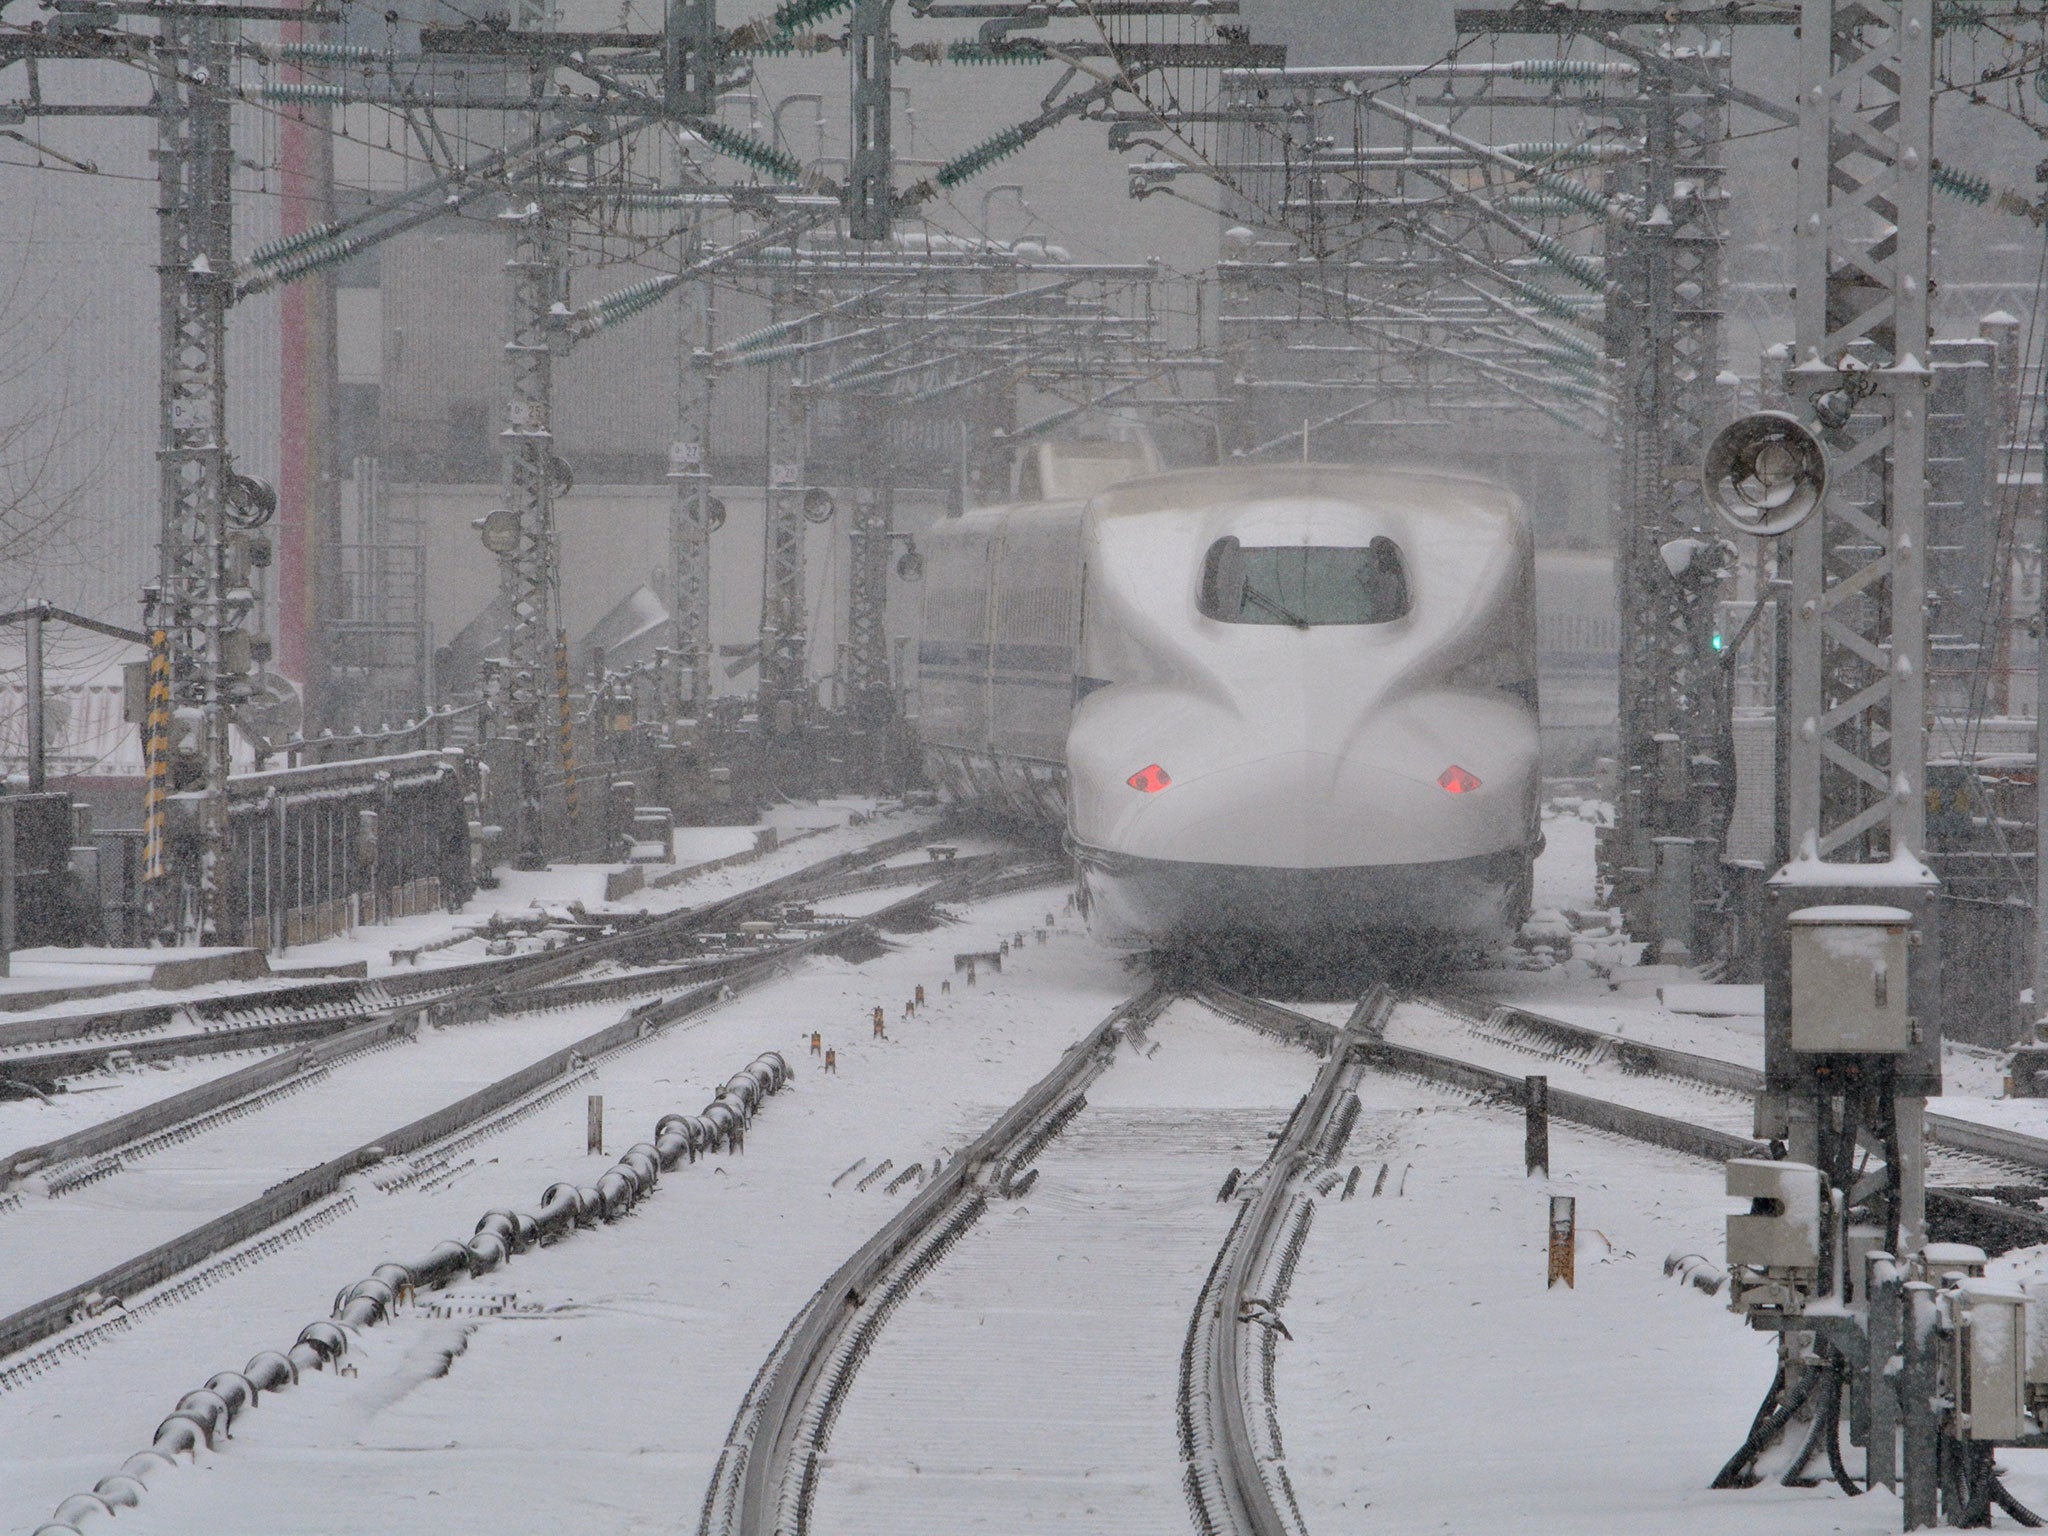 A bullet train leaves JR Tokyo Station in the snow on February 8, 2014